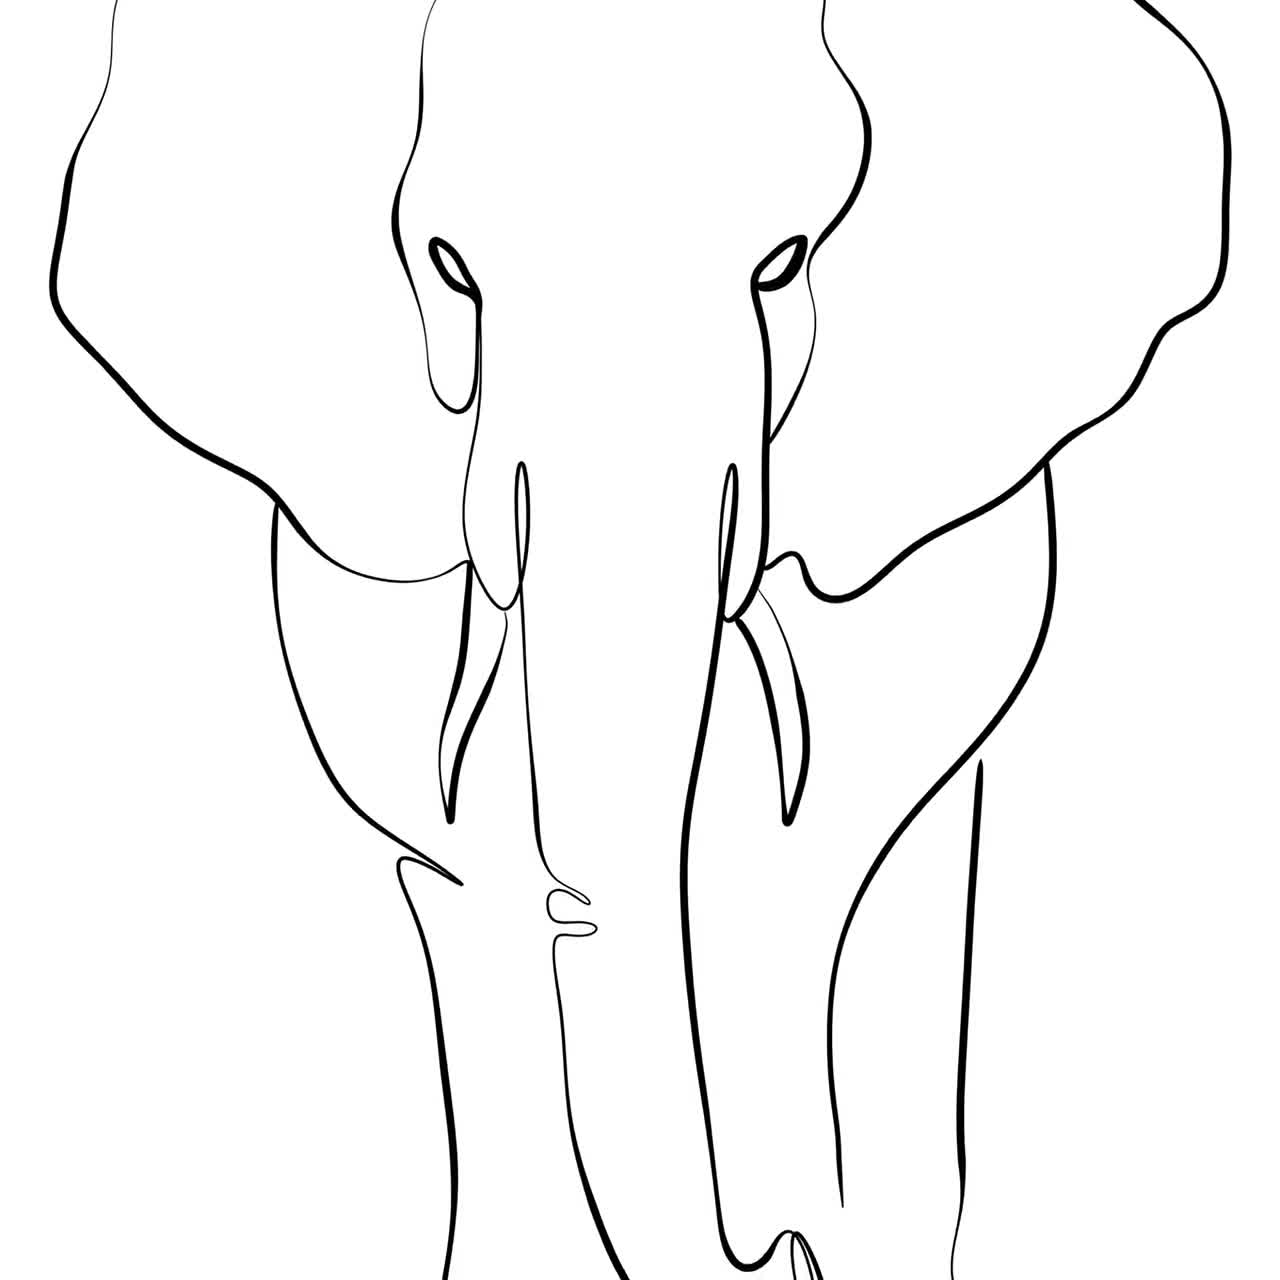 Elephant outline logo simple Royalty Free Vector Image